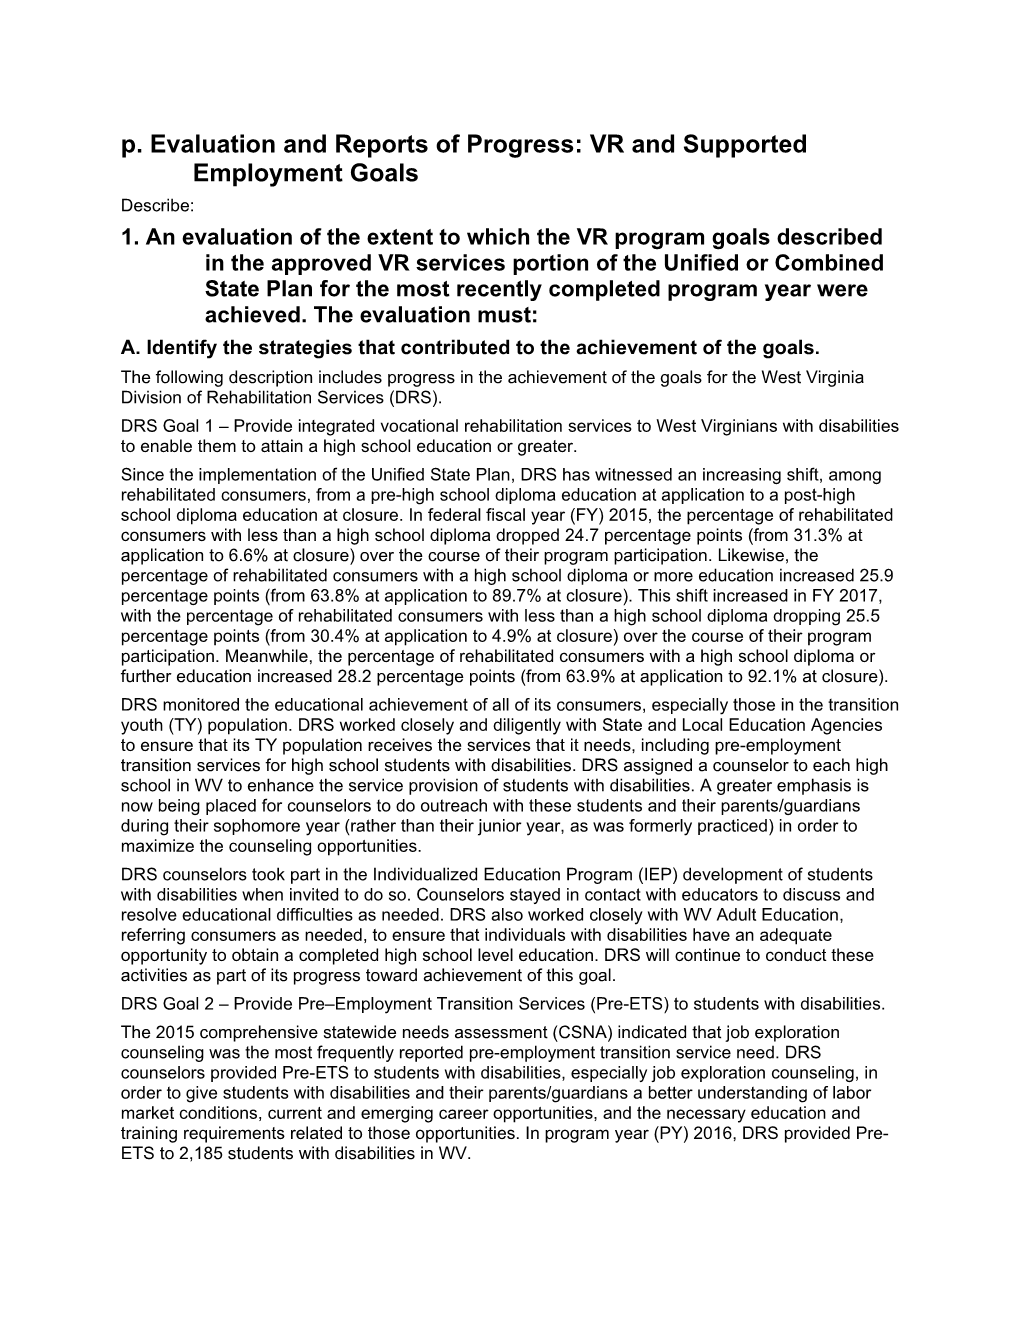 P. Evaluation and Reports of Progress: VR and Supported Employment Goals